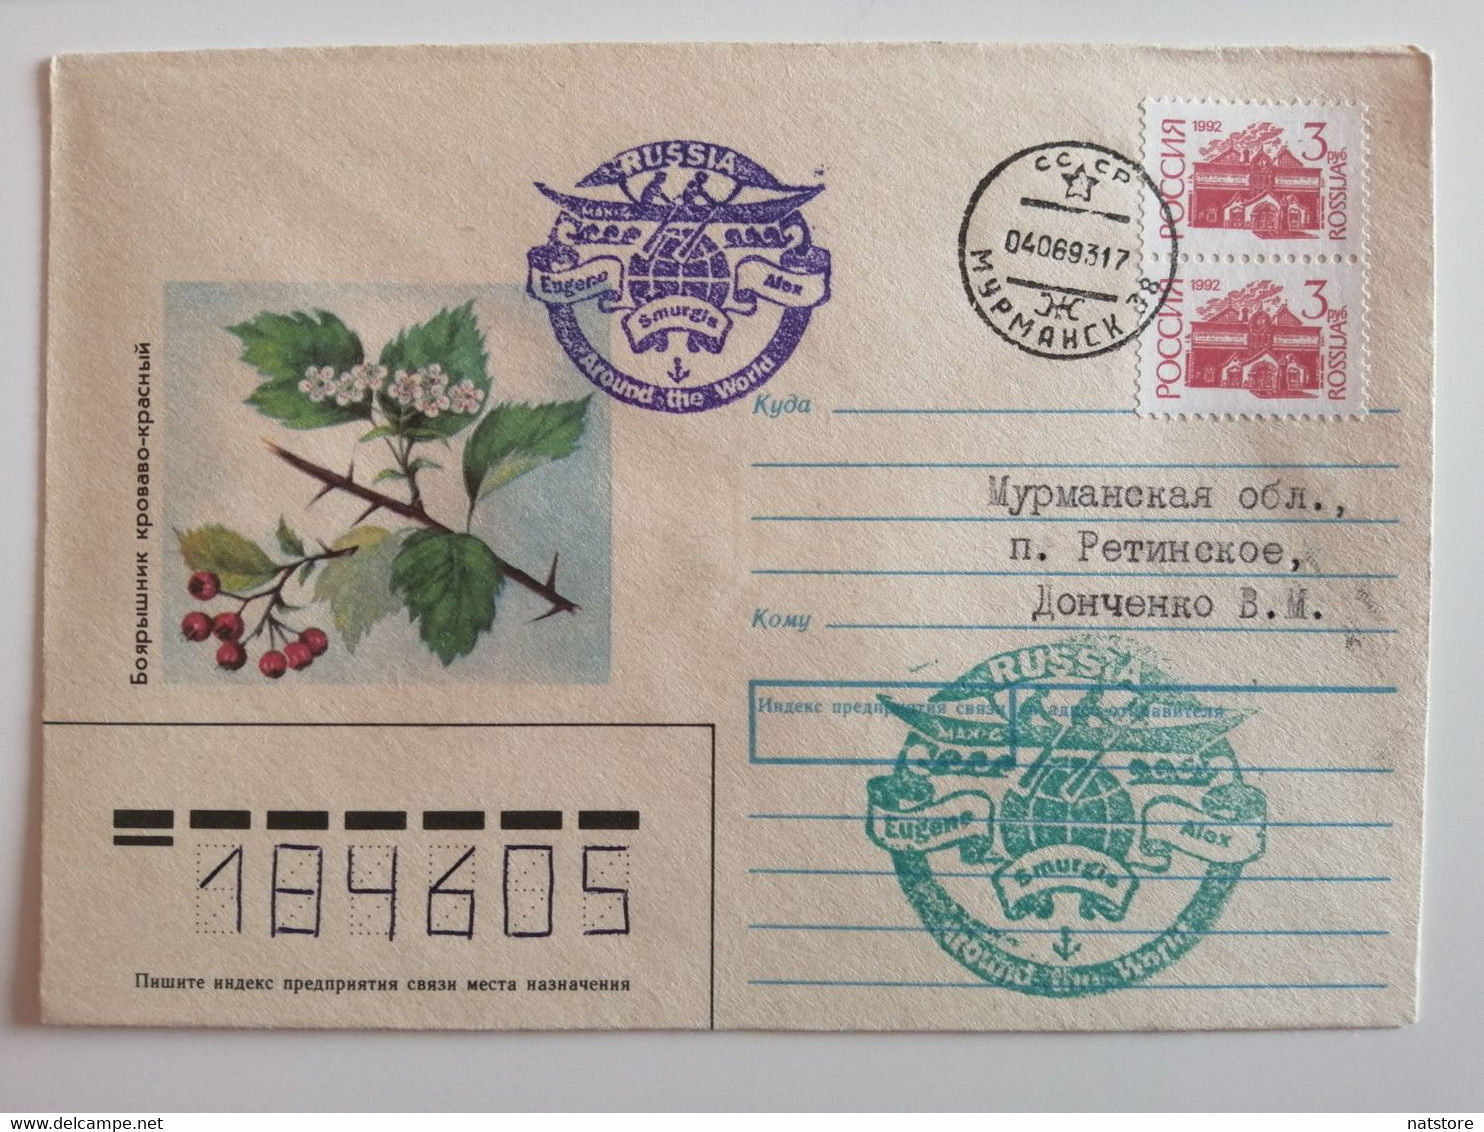 1989..USSR. COVER WITH GLUED STAMP AND SPECIAL CANCELLATION ''RUSSIA..EUGENE ALEX SMURGIS..AROUND THE WORLD'' - Programmes Scientifiques